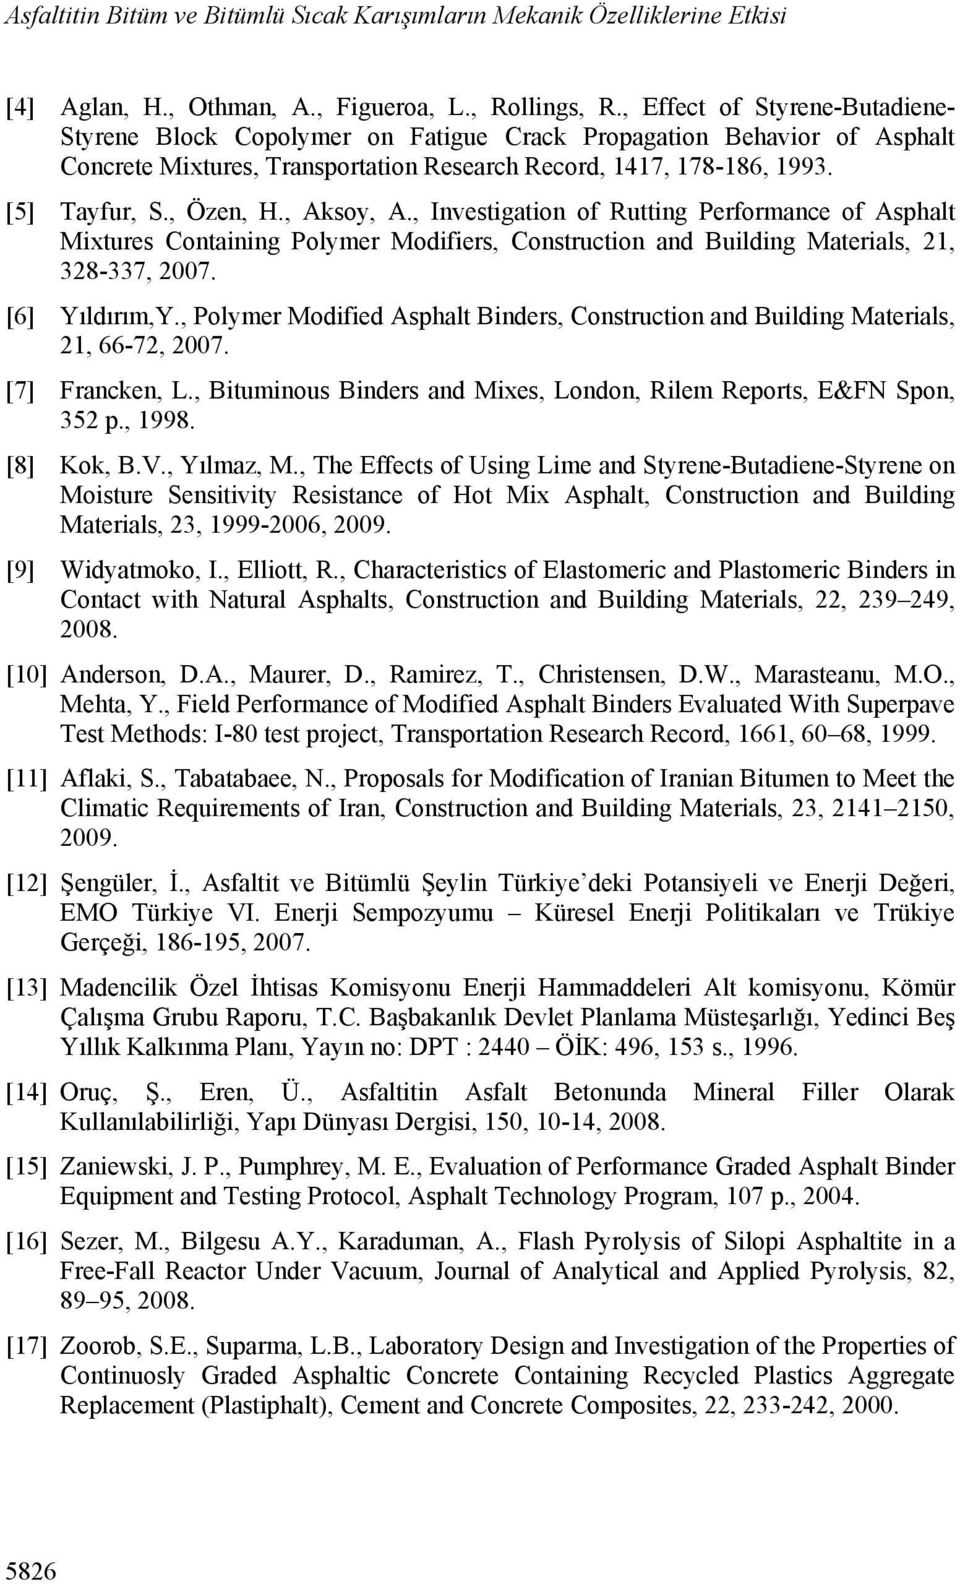 , Aksoy, A., Investigation of Rutting Performance of Asphalt Mixtures Containing Polymer Modifiers, Construction and Building Materials, 21, 328-337, 2007. [6] Yıldırım,Y.